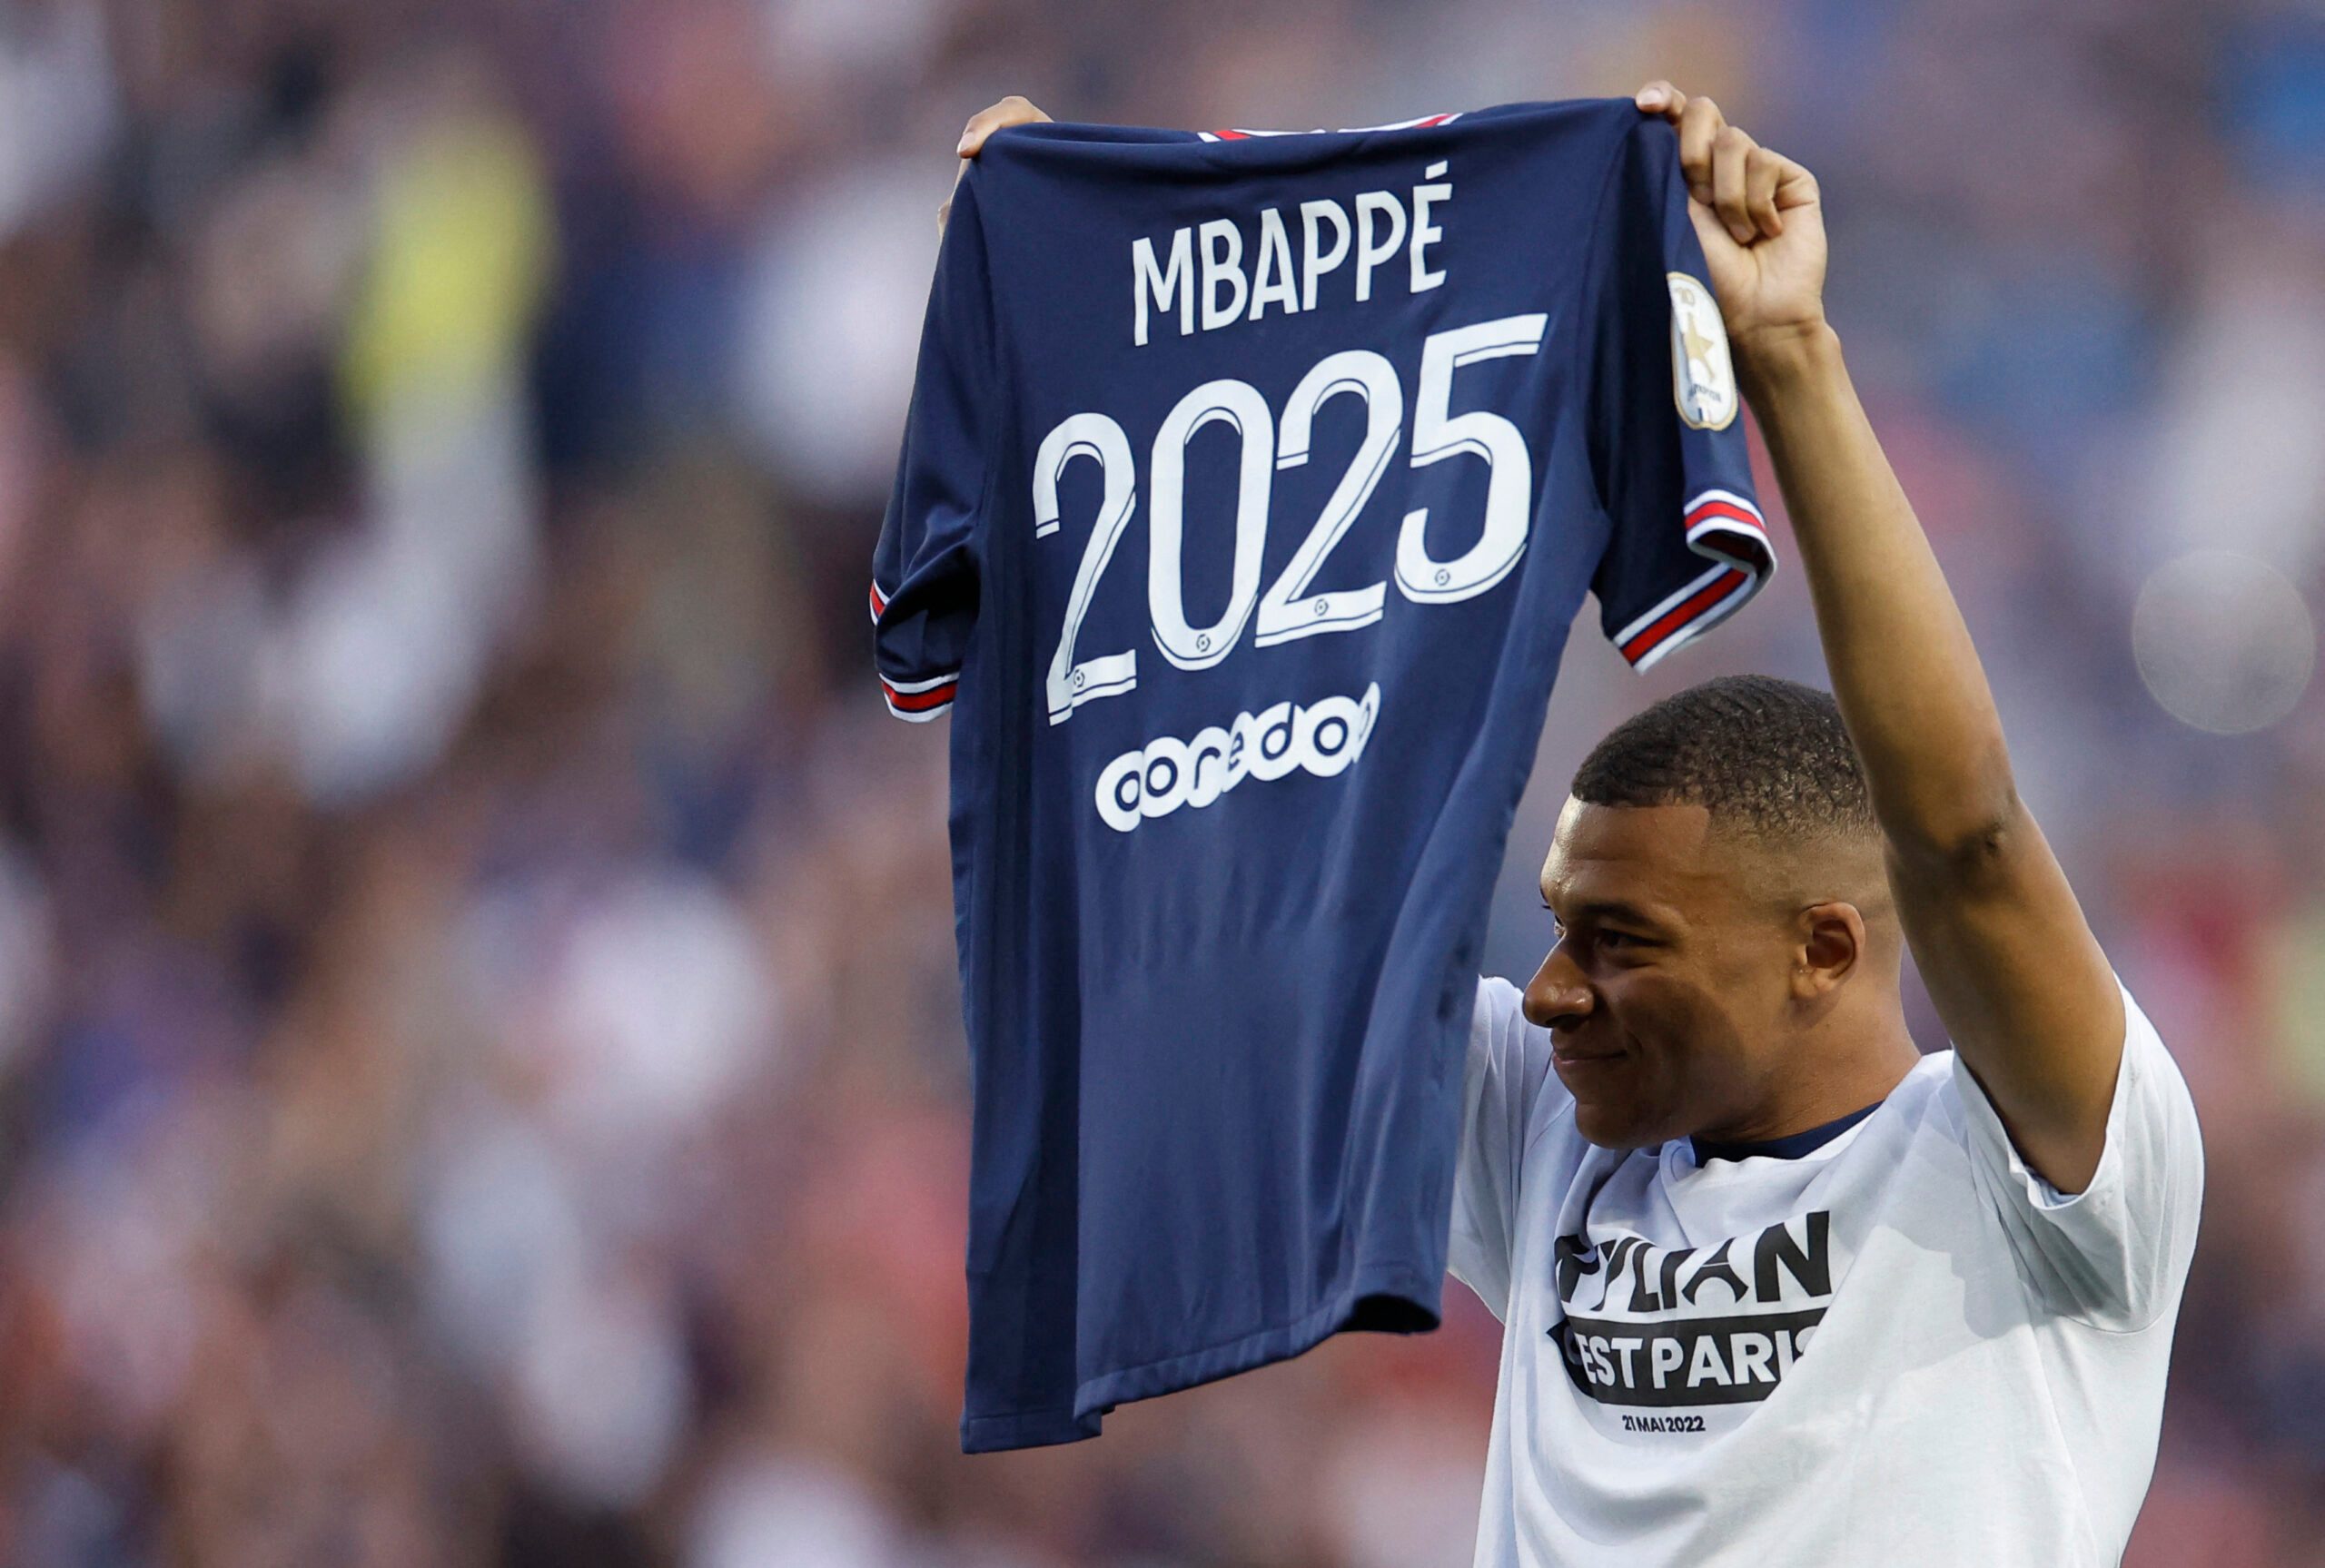 Crowd erupts as Kylian Mbappe extends PSG contract until 2025